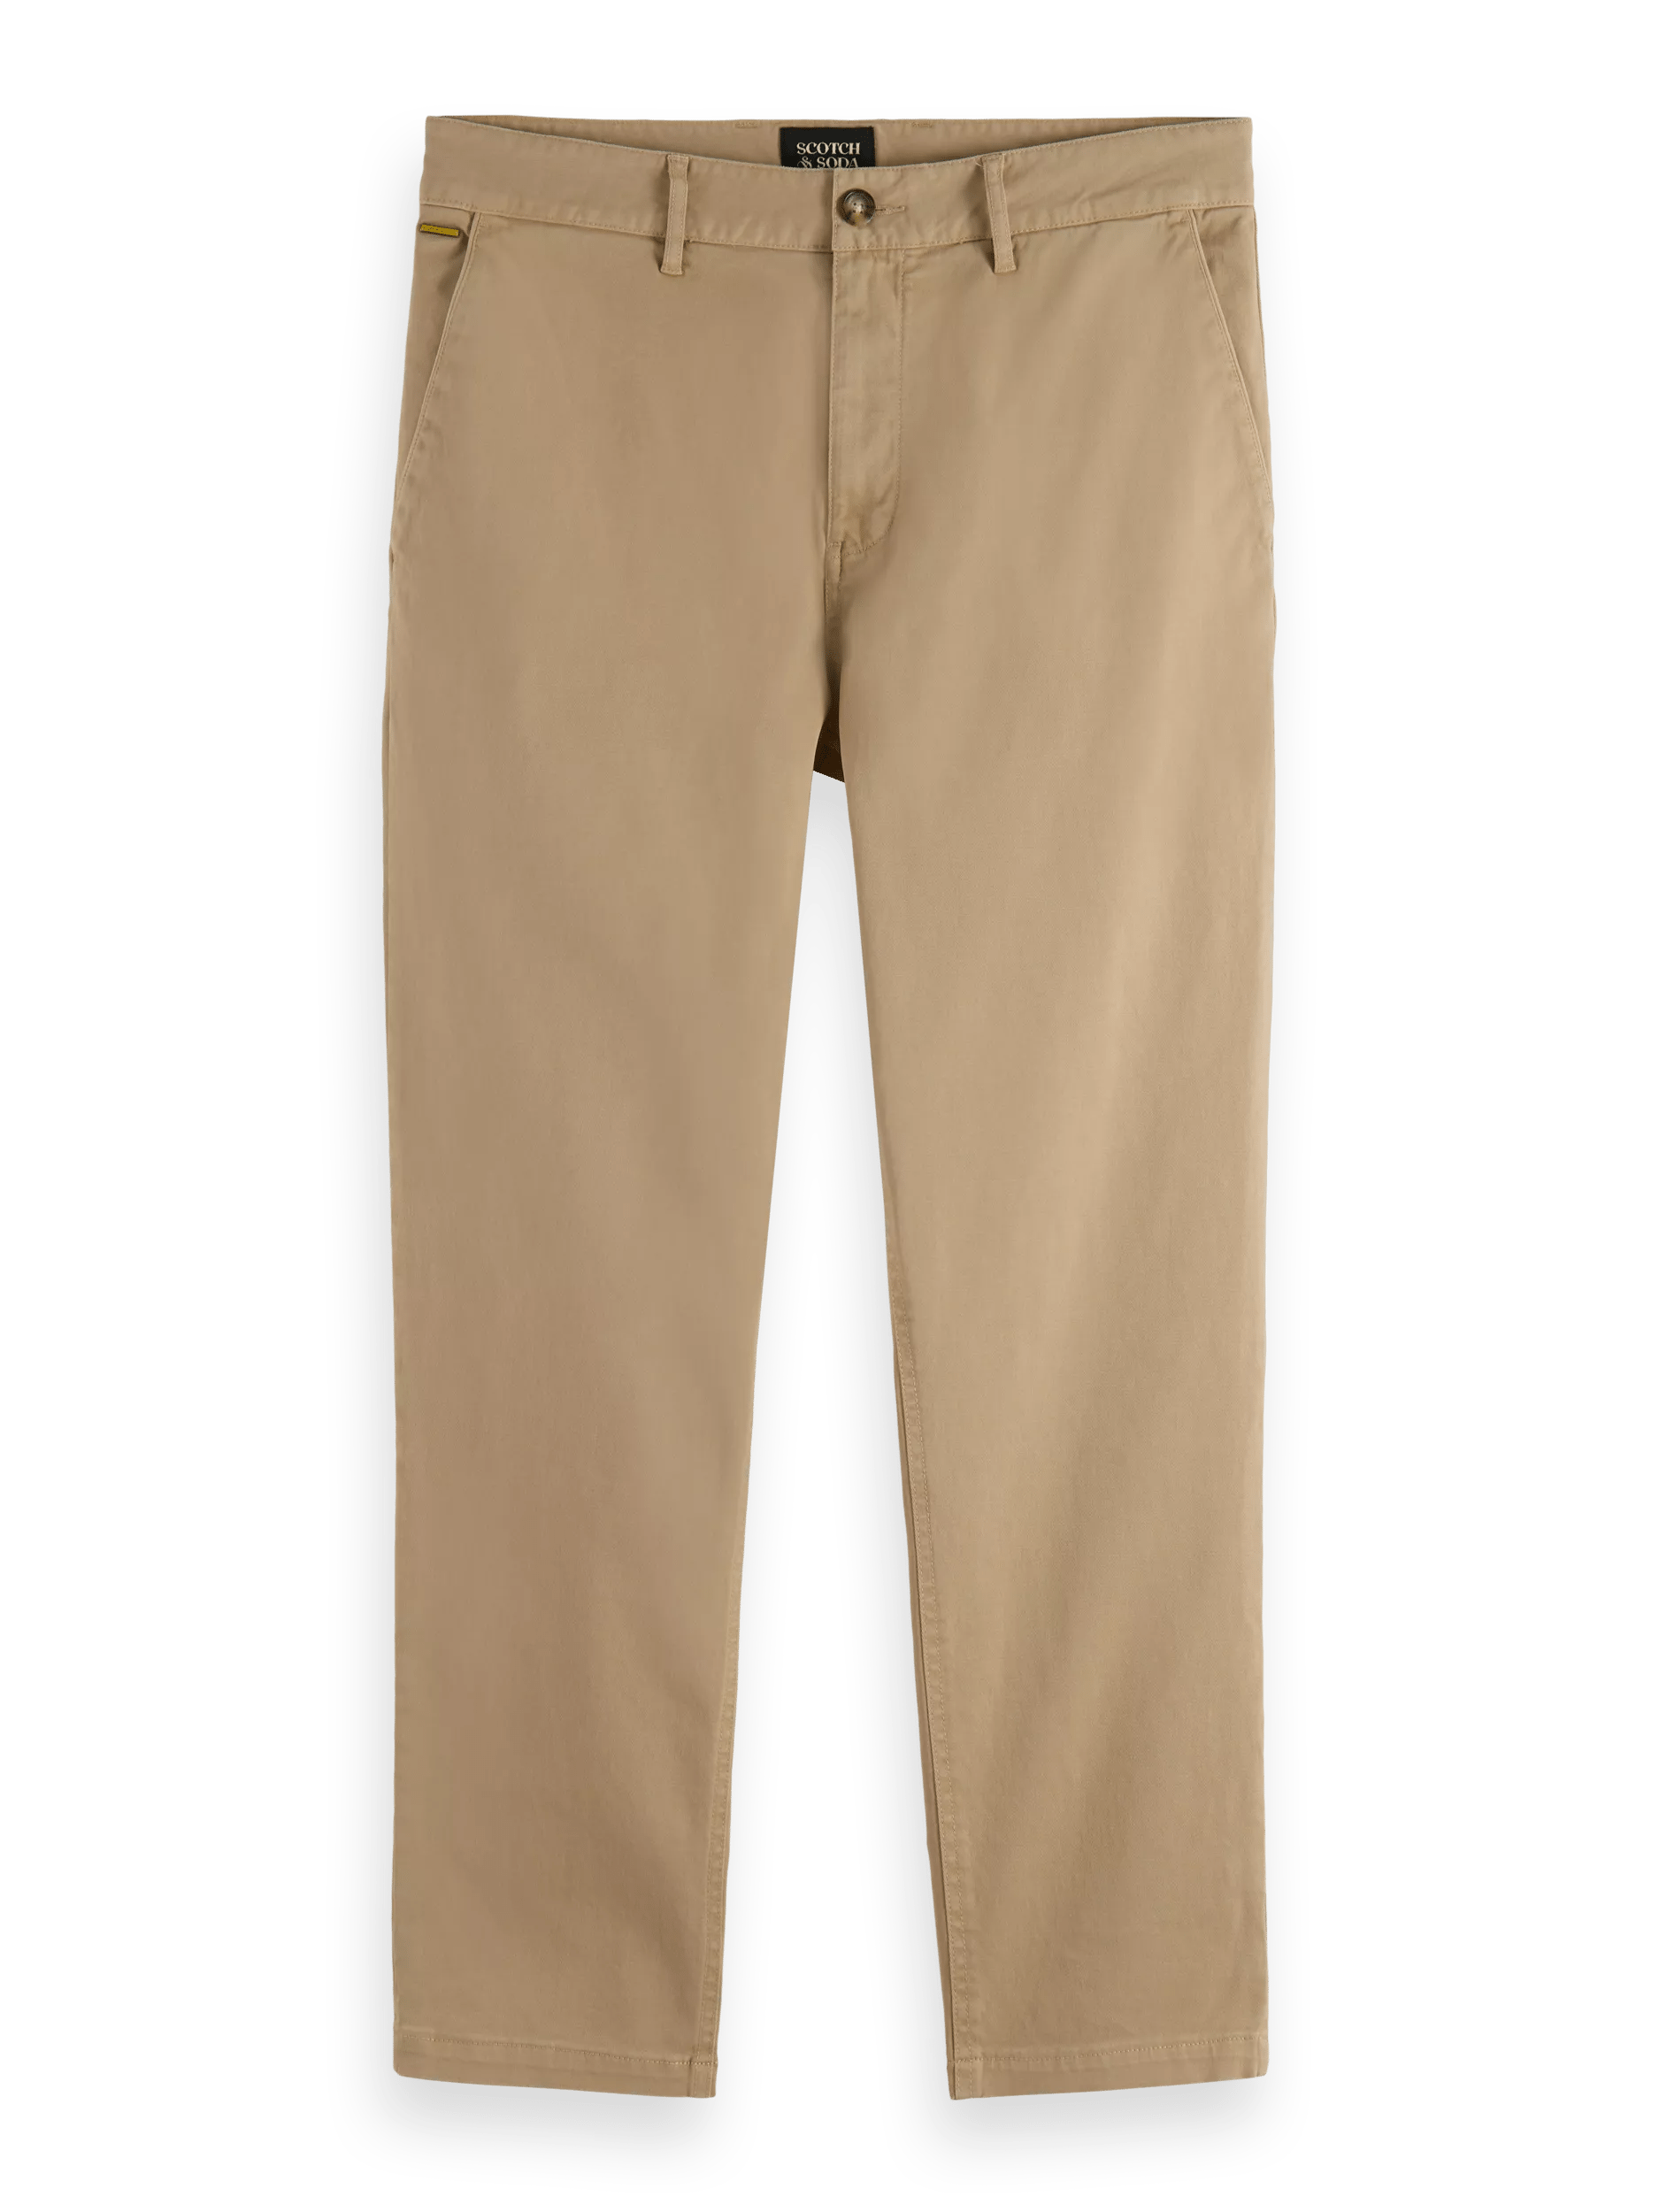 Garment-dyed stretch twill chino trousers